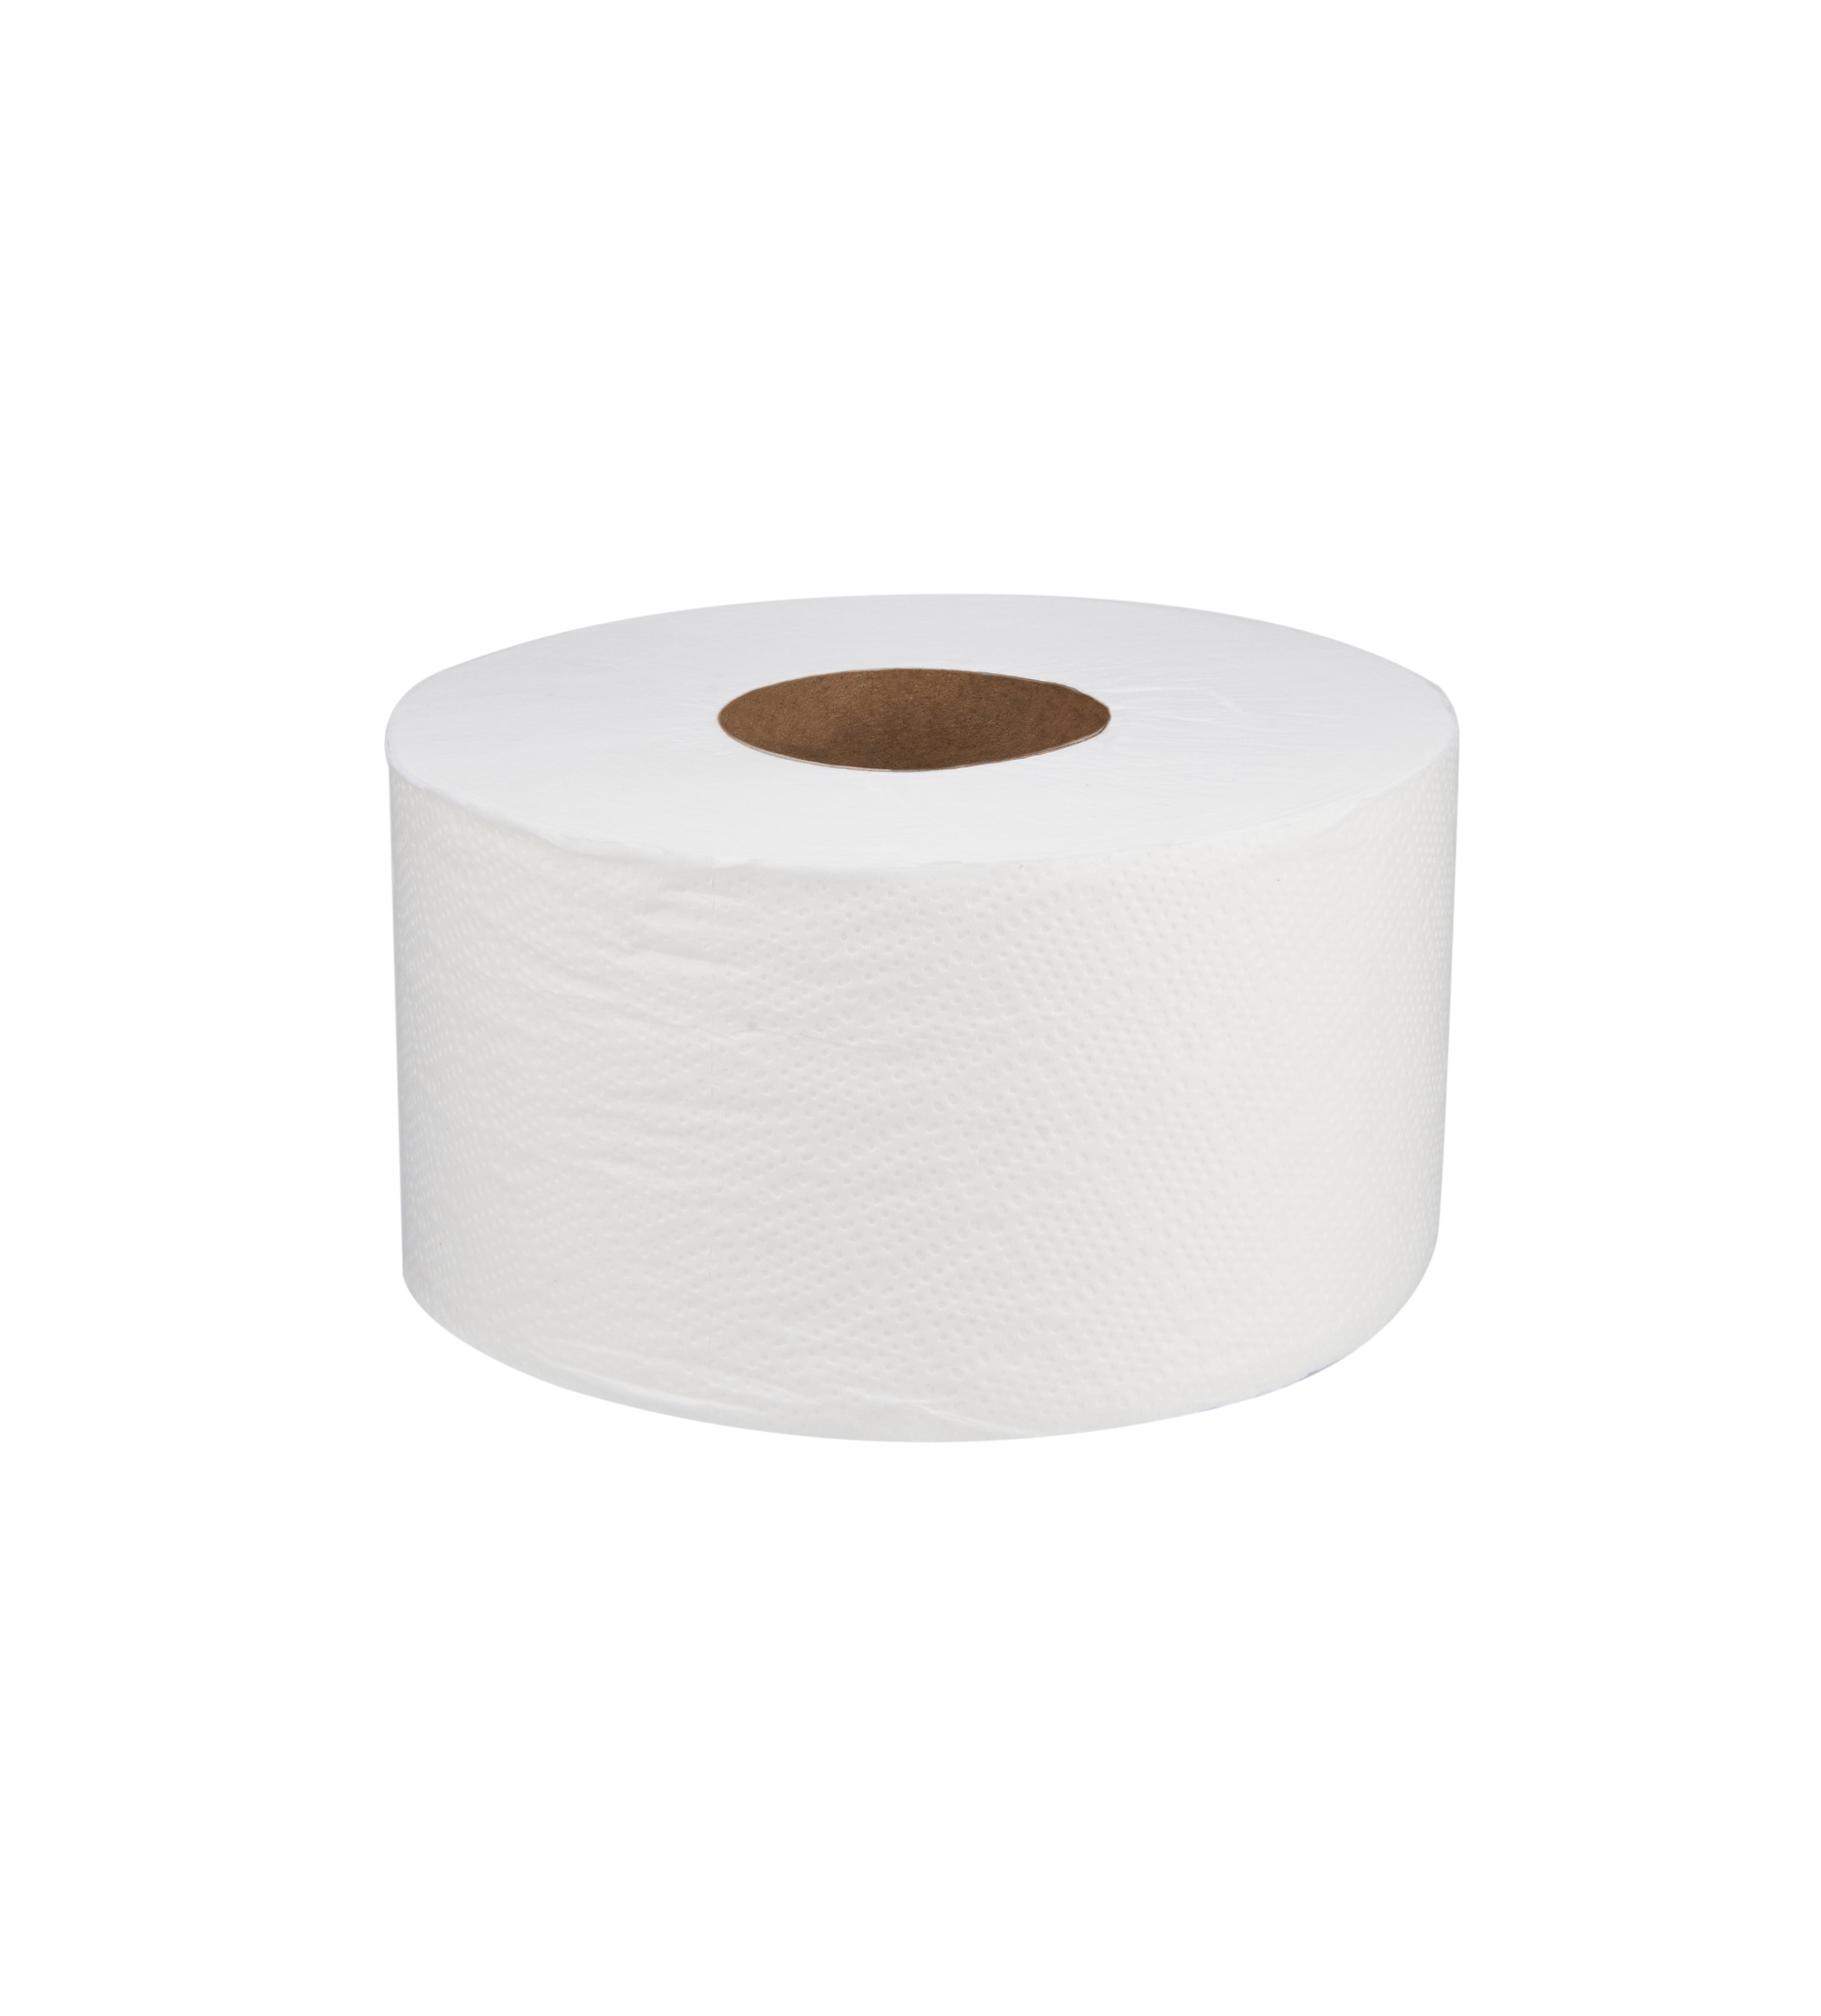 100 Rolls Soft n Cool Toilet Tissues Rolls 2 Ply 100 Sheets